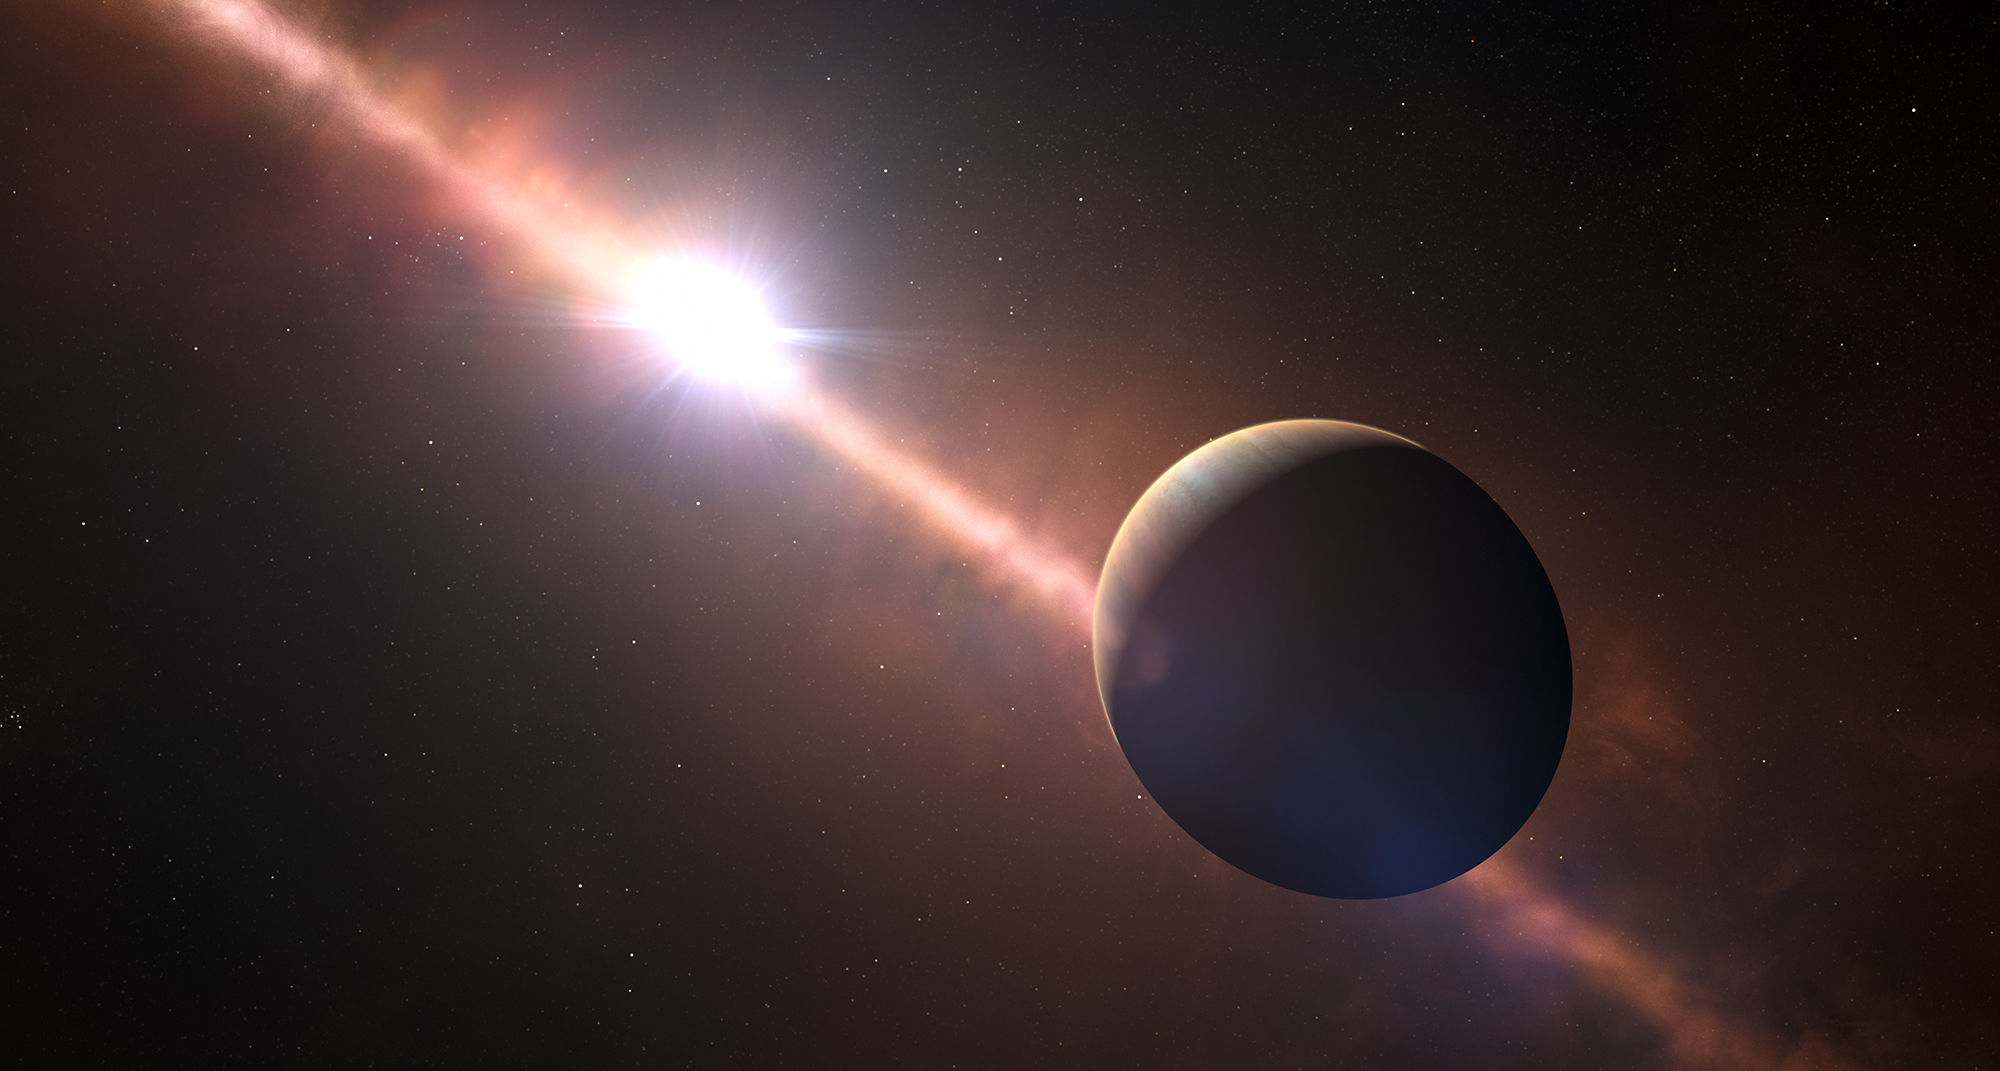 Artwork depicting the exoplanet Beta Pictoris b, showing the planet-forming debris disk around the star. The planet is flattened due to its rapid rotation. Credit: ESO L. Calçada/N. Risinger (skysurvey.org)